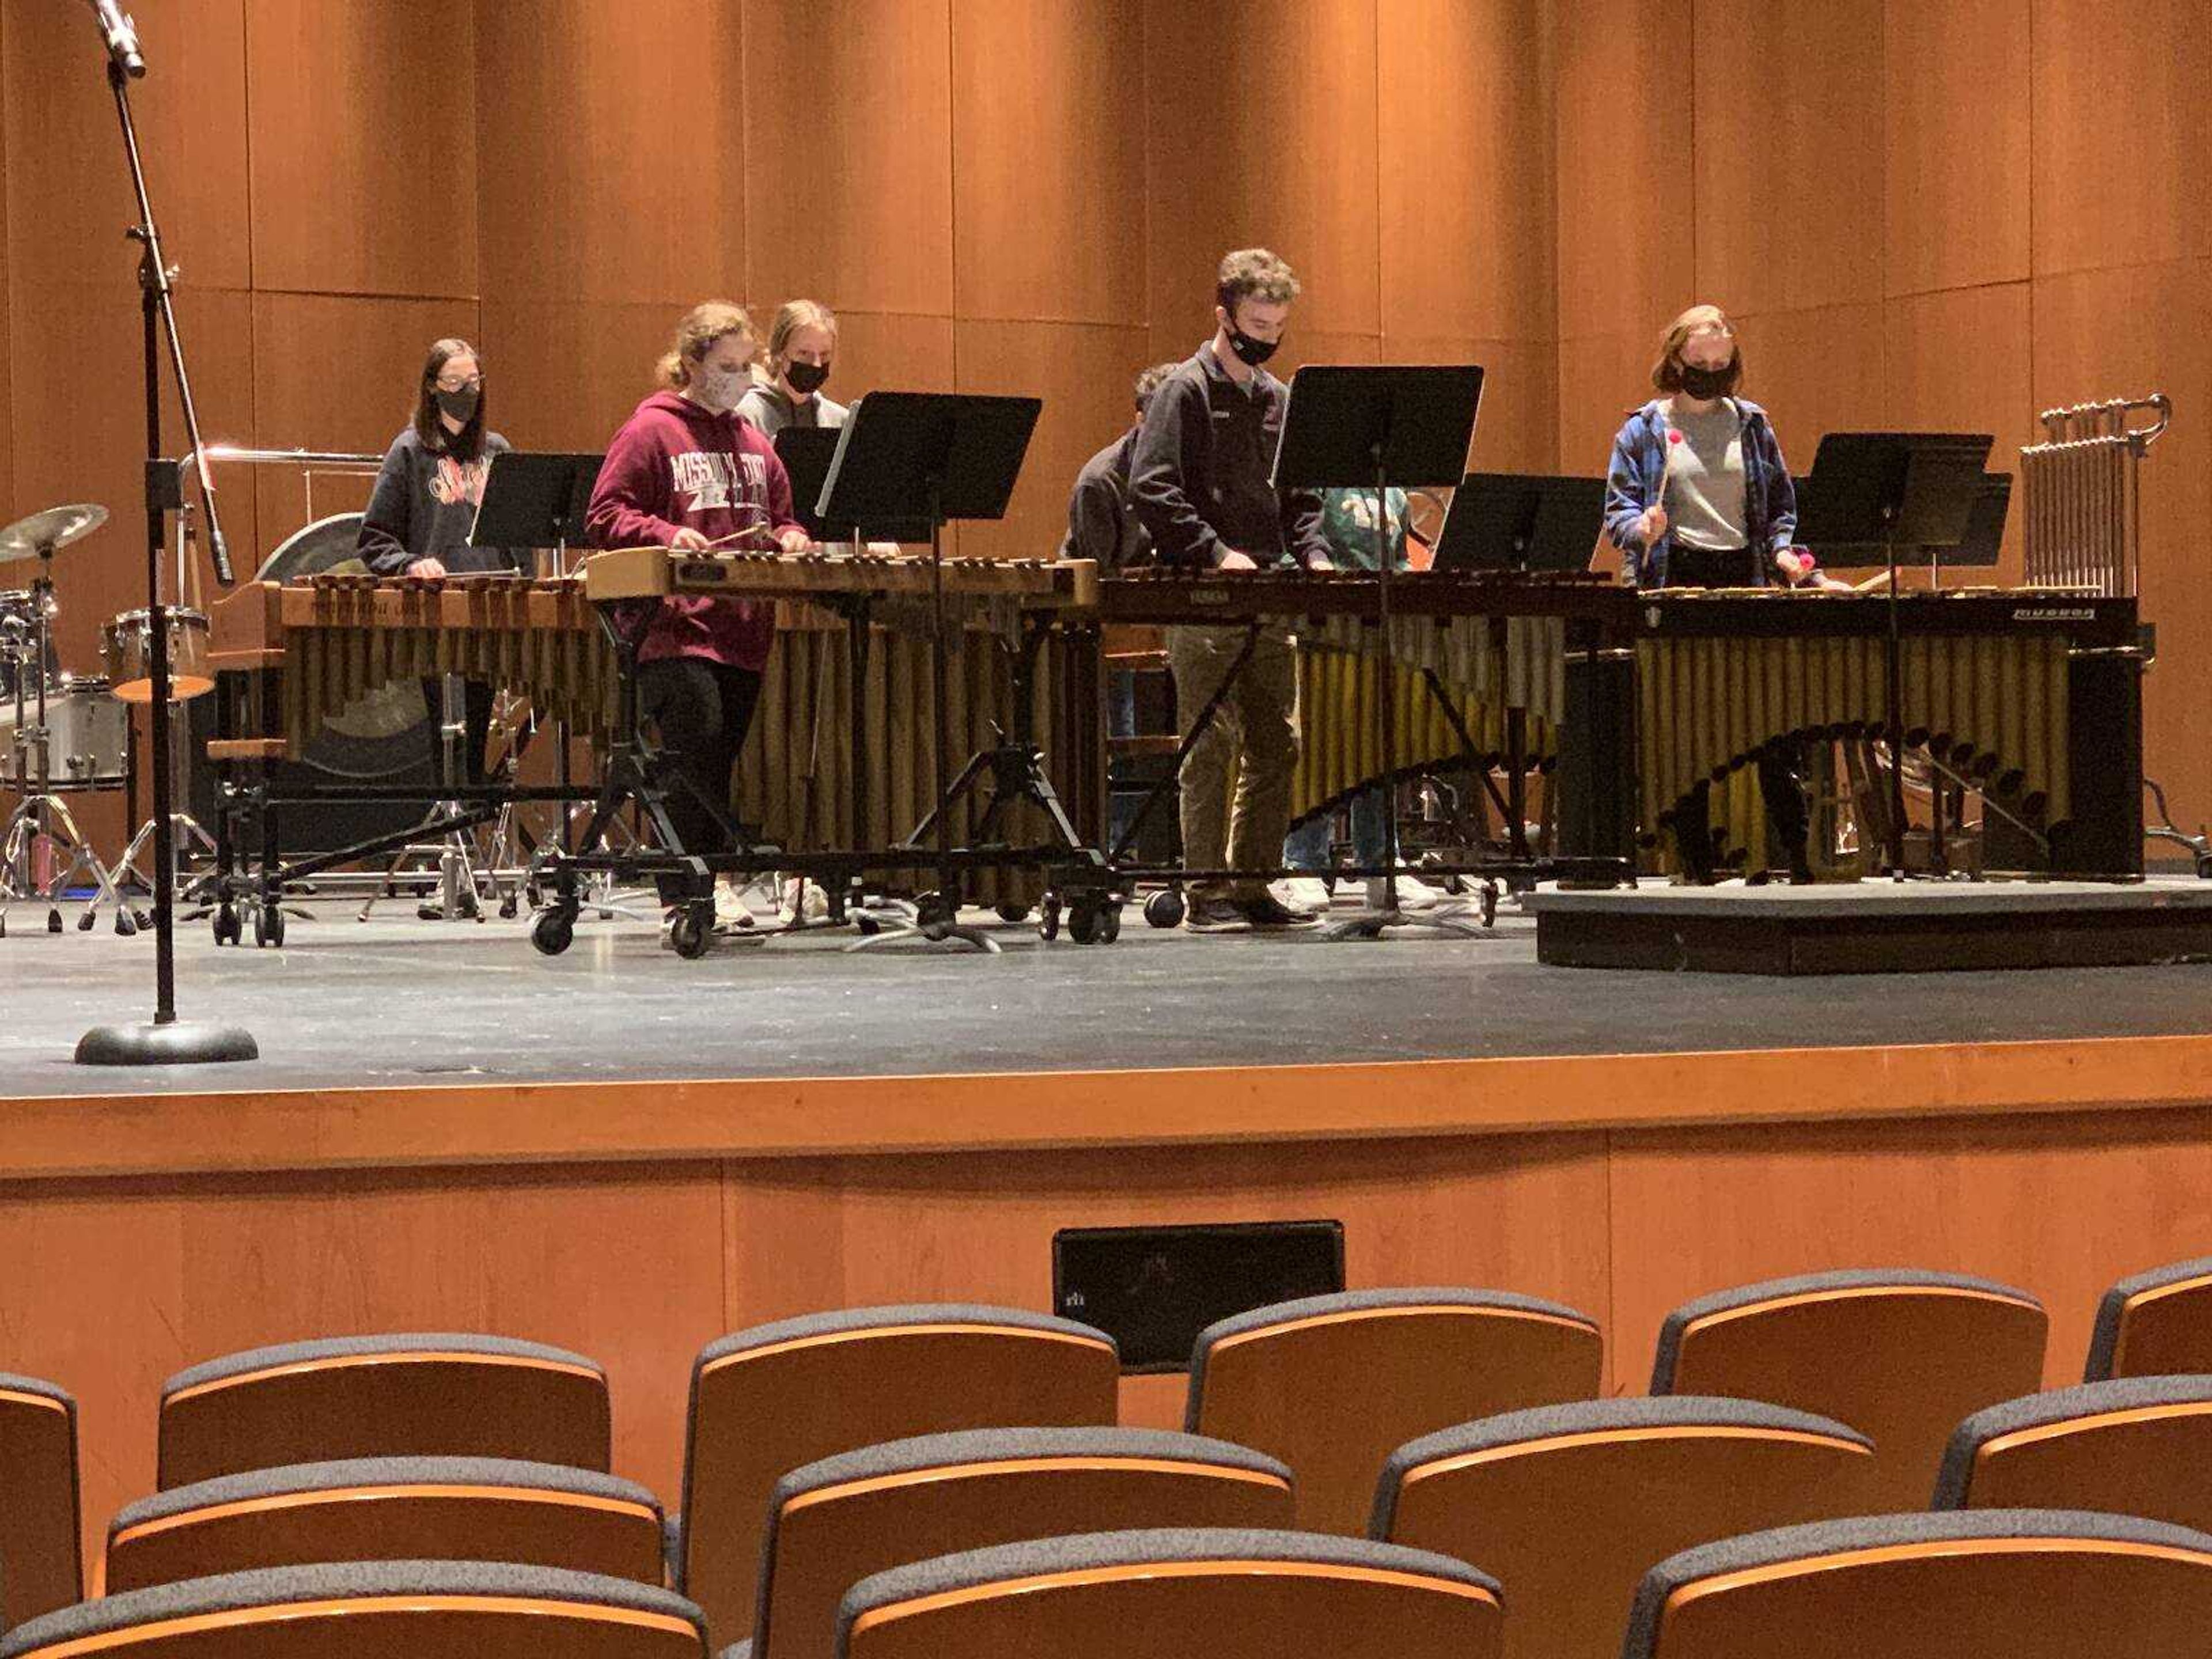 Local high school Percussion Festival held at River Campus